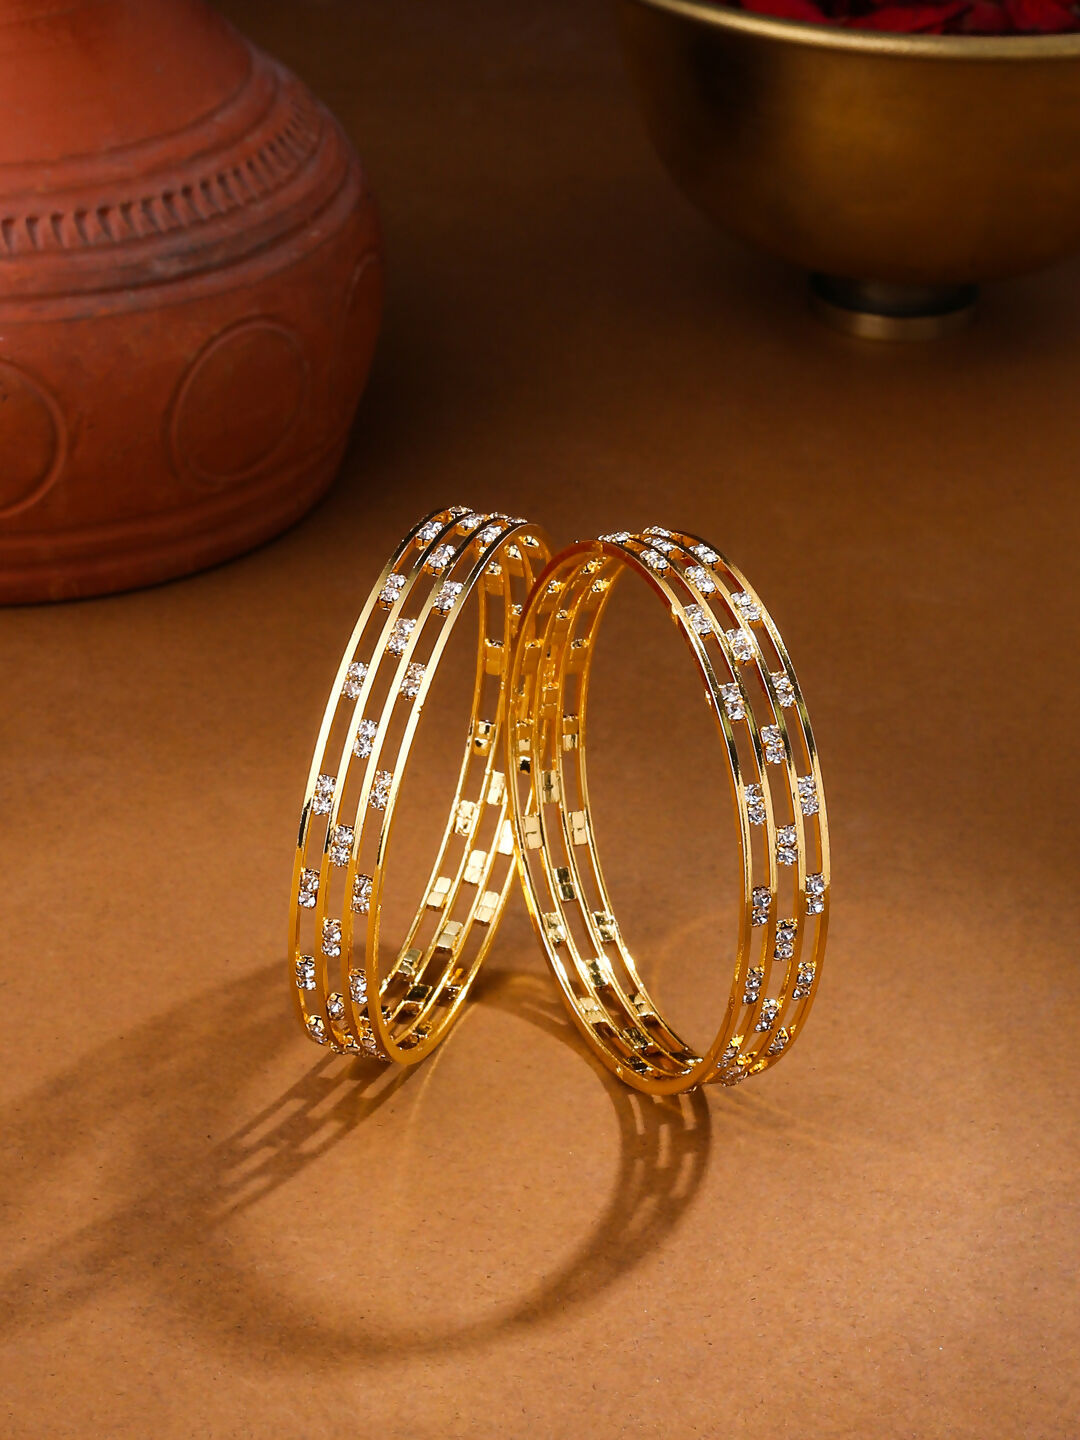 NVR Women Set of 2 Gold-Plated Traditional Bangles - Distacart